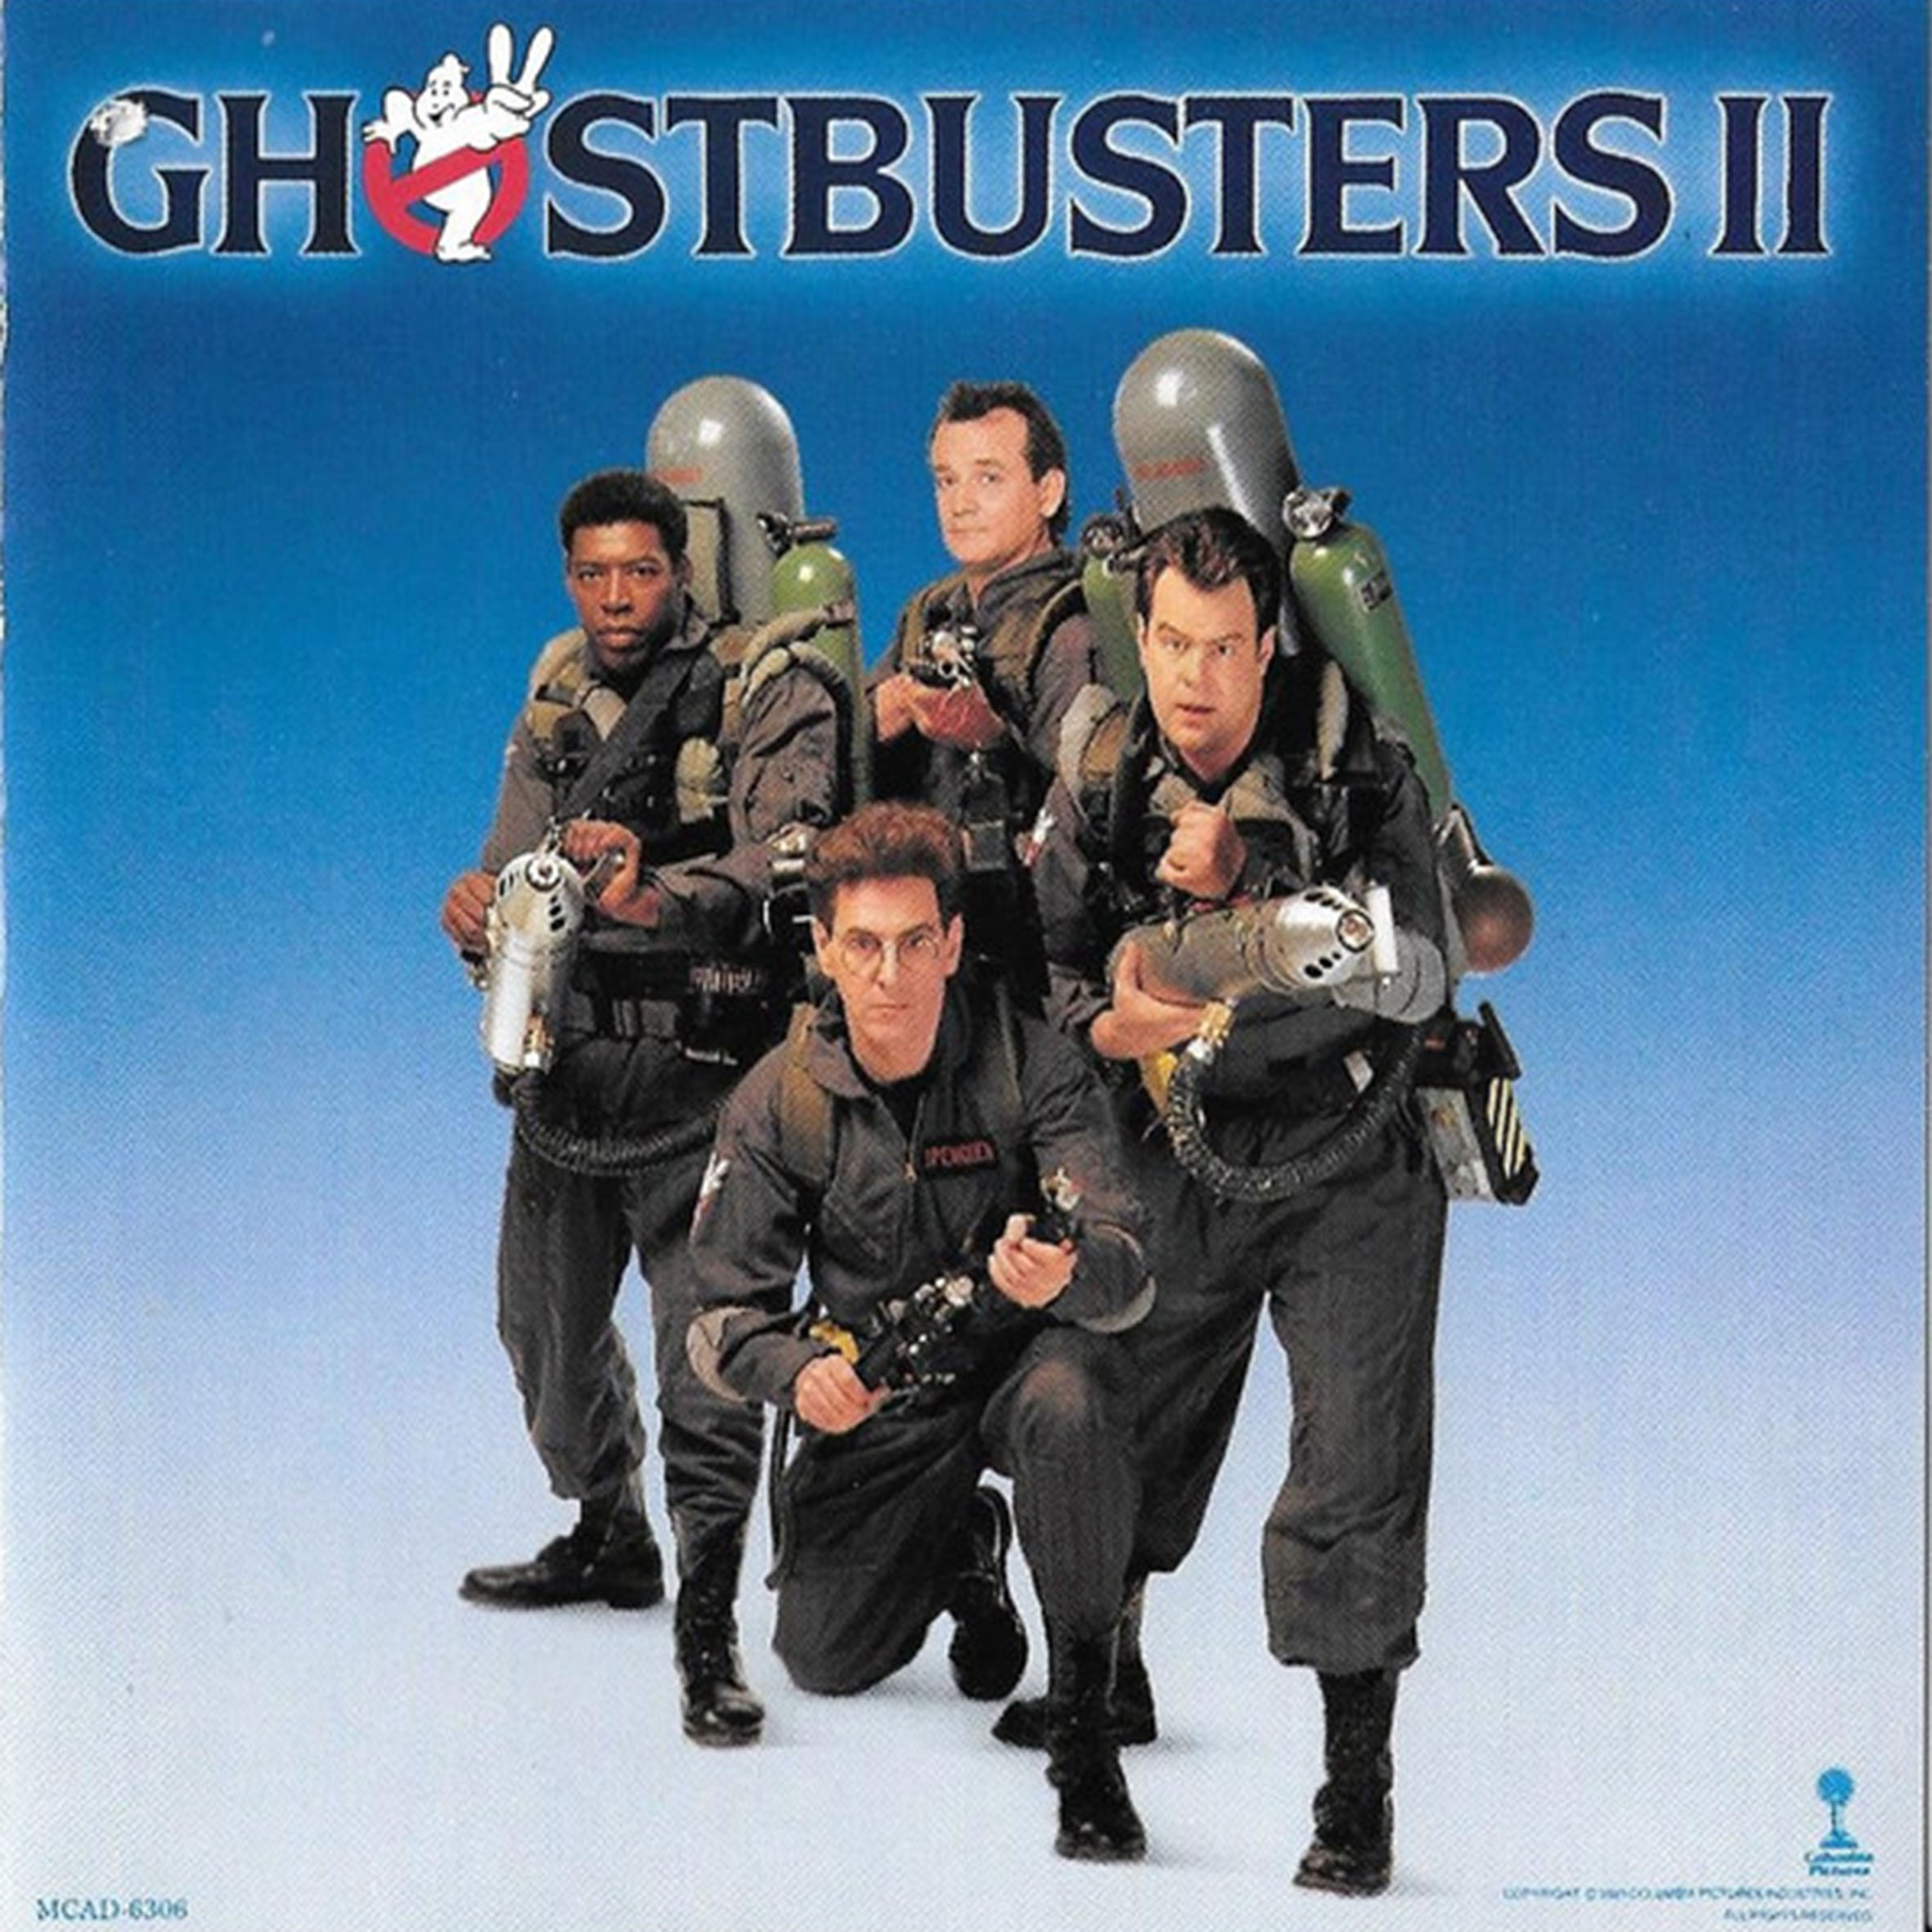 CD - Ghostbusters II - The Motion Picture Soundtrack (usa)